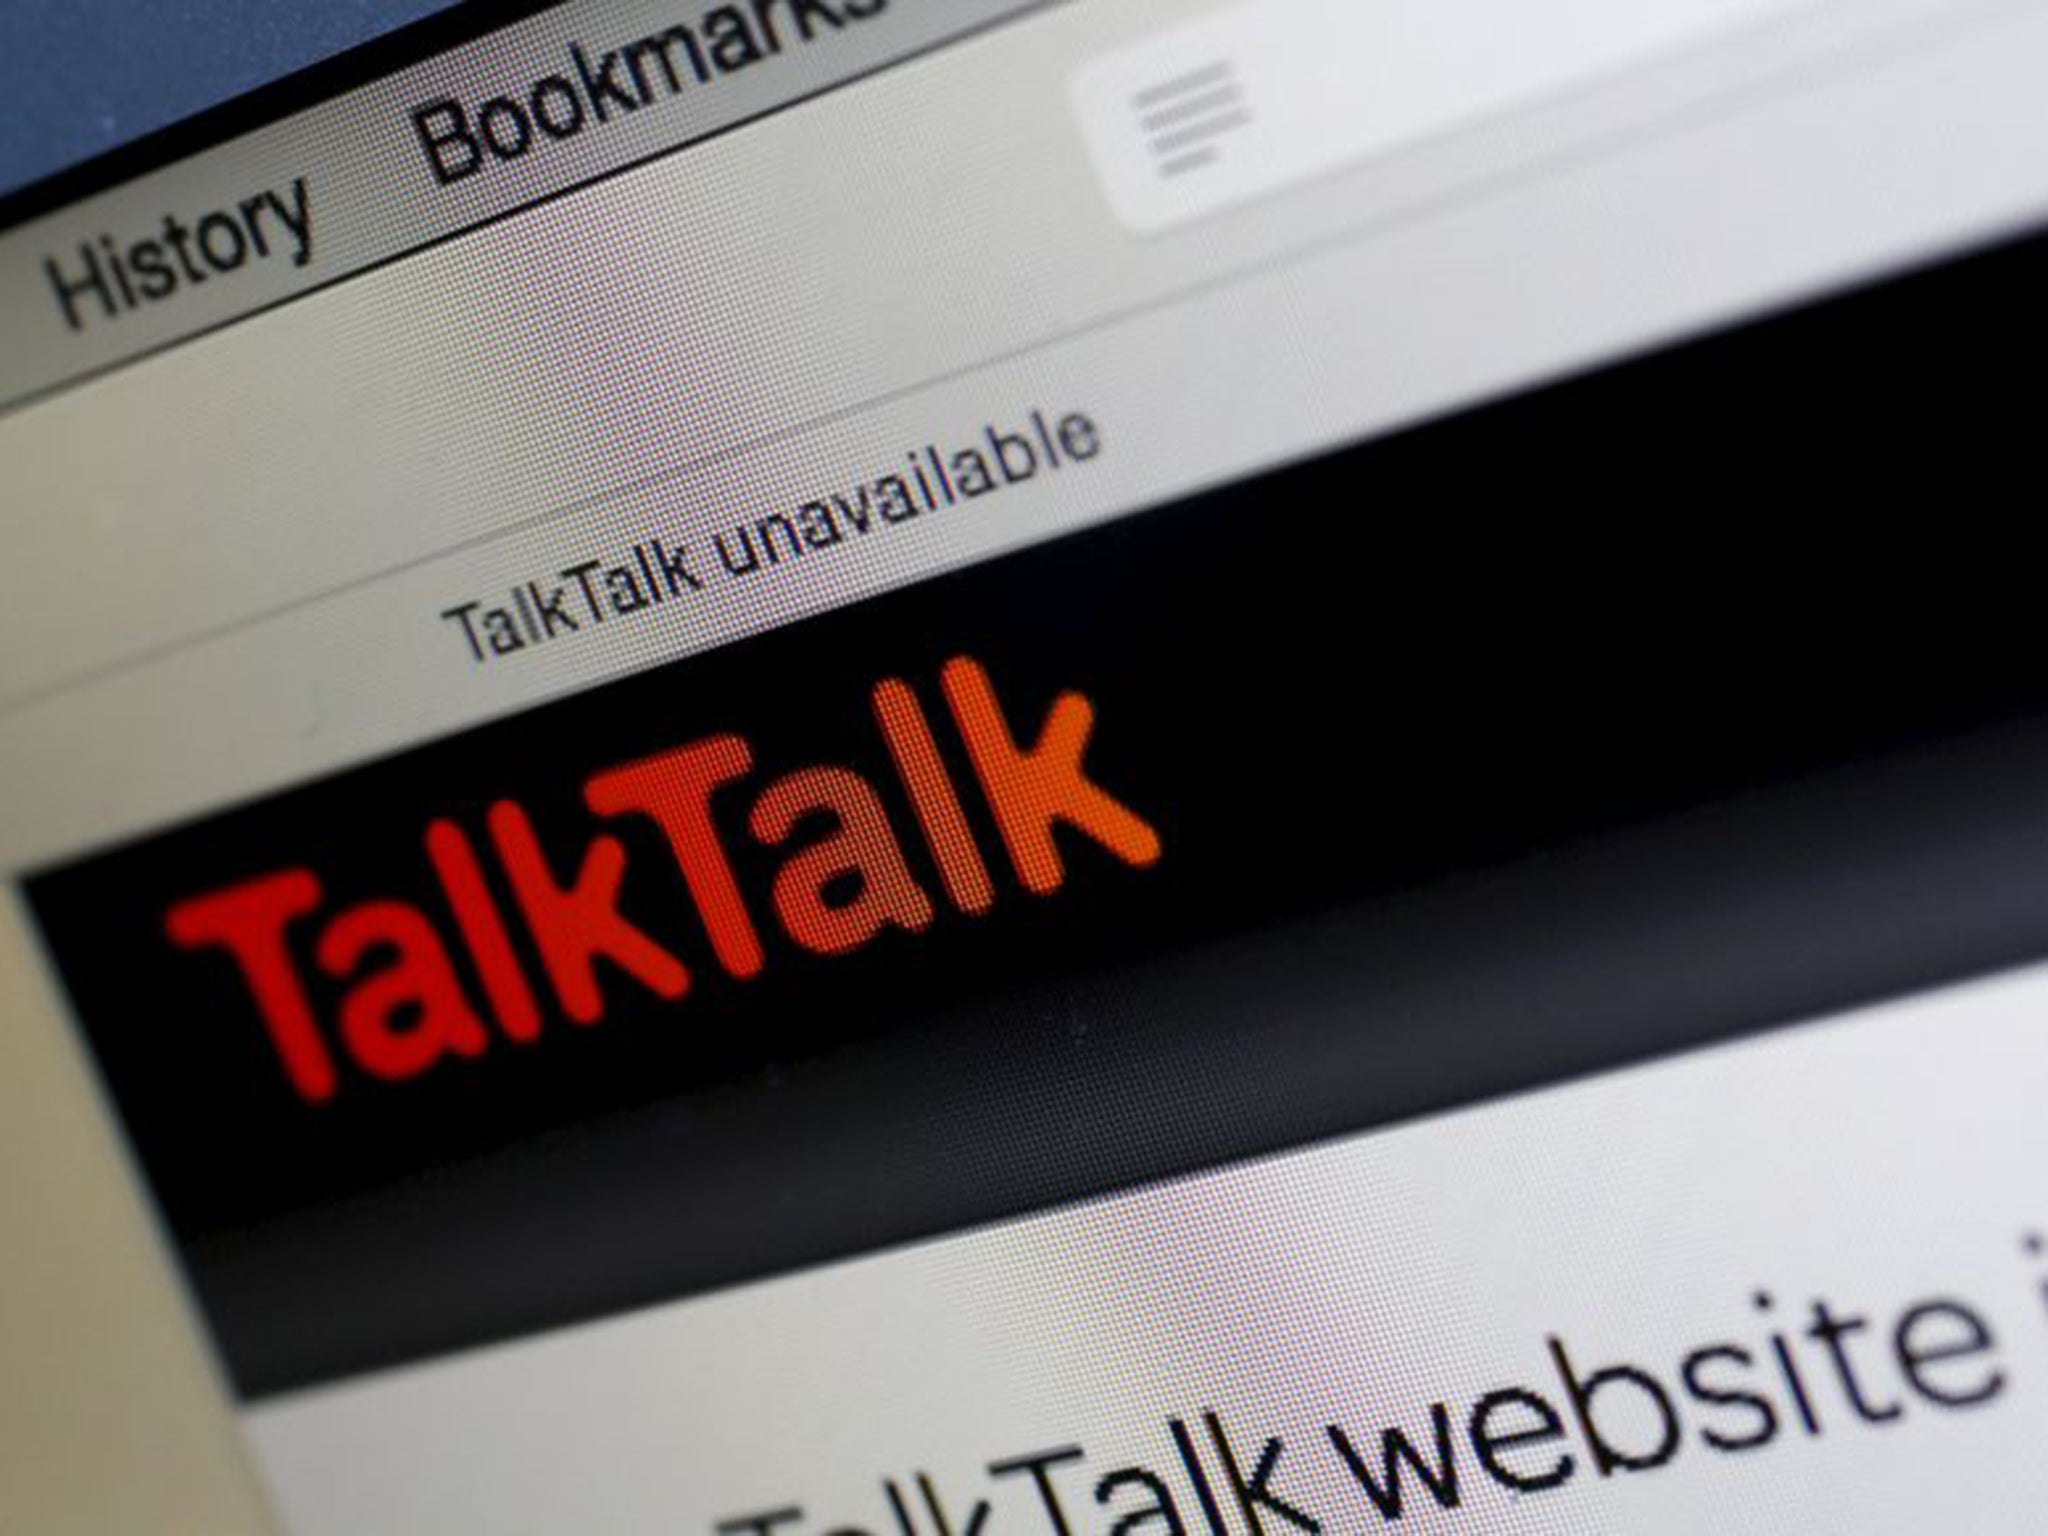 Talktalk Named As Most Complained About Broadband And Landline Provider The Independent The Independent